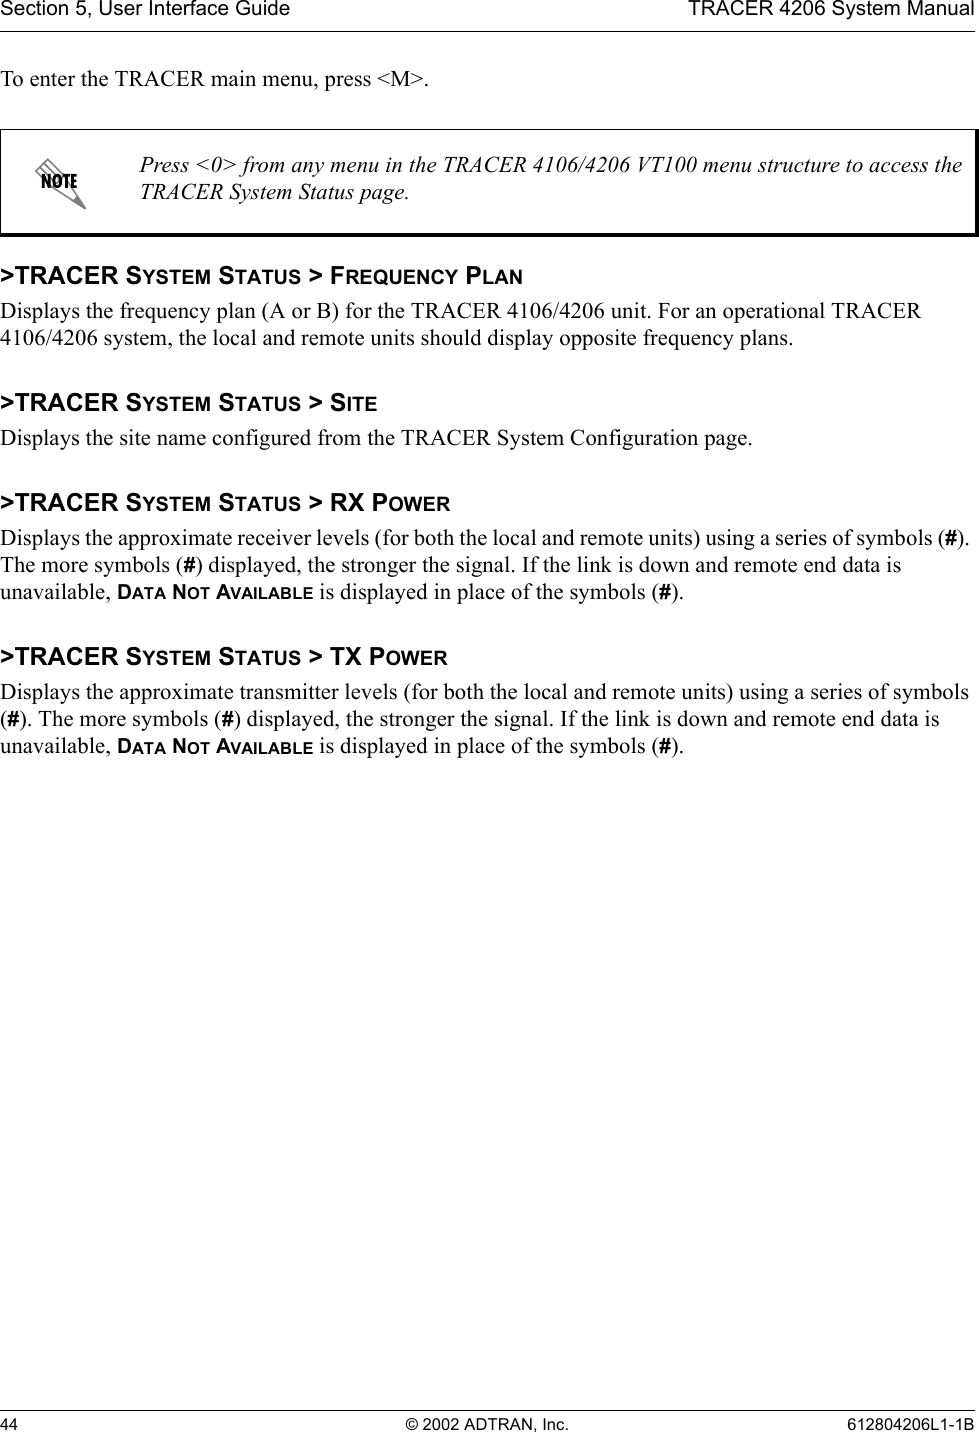 Section 5, User Interface Guide TRACER 4206 System Manual44 © 2002 ADTRAN, Inc. 612804206L1-1BTo enter the TRACER main menu, press &lt;M&gt;.&gt;TRACER SYSTEM STATUS &gt; FREQUENCY PLANDisplays the frequency plan (A or B) for the TRACER 4106/4206 unit. For an operational TRACER 4106/4206 system, the local and remote units should display opposite frequency plans.&gt;TRACER SYSTEM STATUS &gt; SITEDisplays the site name configured from the TRACER System Configuration page.&gt;TRACER SYSTEM STATUS &gt; RX POWERDisplays the approximate receiver levels (for both the local and remote units) using a series of symbols (#). The more symbols (#) displayed, the stronger the signal. If the link is down and remote end data is unavailable, DATA NOT AVAILABLE is displayed in place of the symbols (#).&gt;TRACER SYSTEM STATUS &gt; TX POWERDisplays the approximate transmitter levels (for both the local and remote units) using a series of symbols (#). The more symbols (#) displayed, the stronger the signal. If the link is down and remote end data is unavailable, DATA NOT AVAILABLE is displayed in place of the symbols (#).Press &lt;0&gt; from any menu in the TRACER 4106/4206 VT100 menu structure to access the TRACER System Status page.